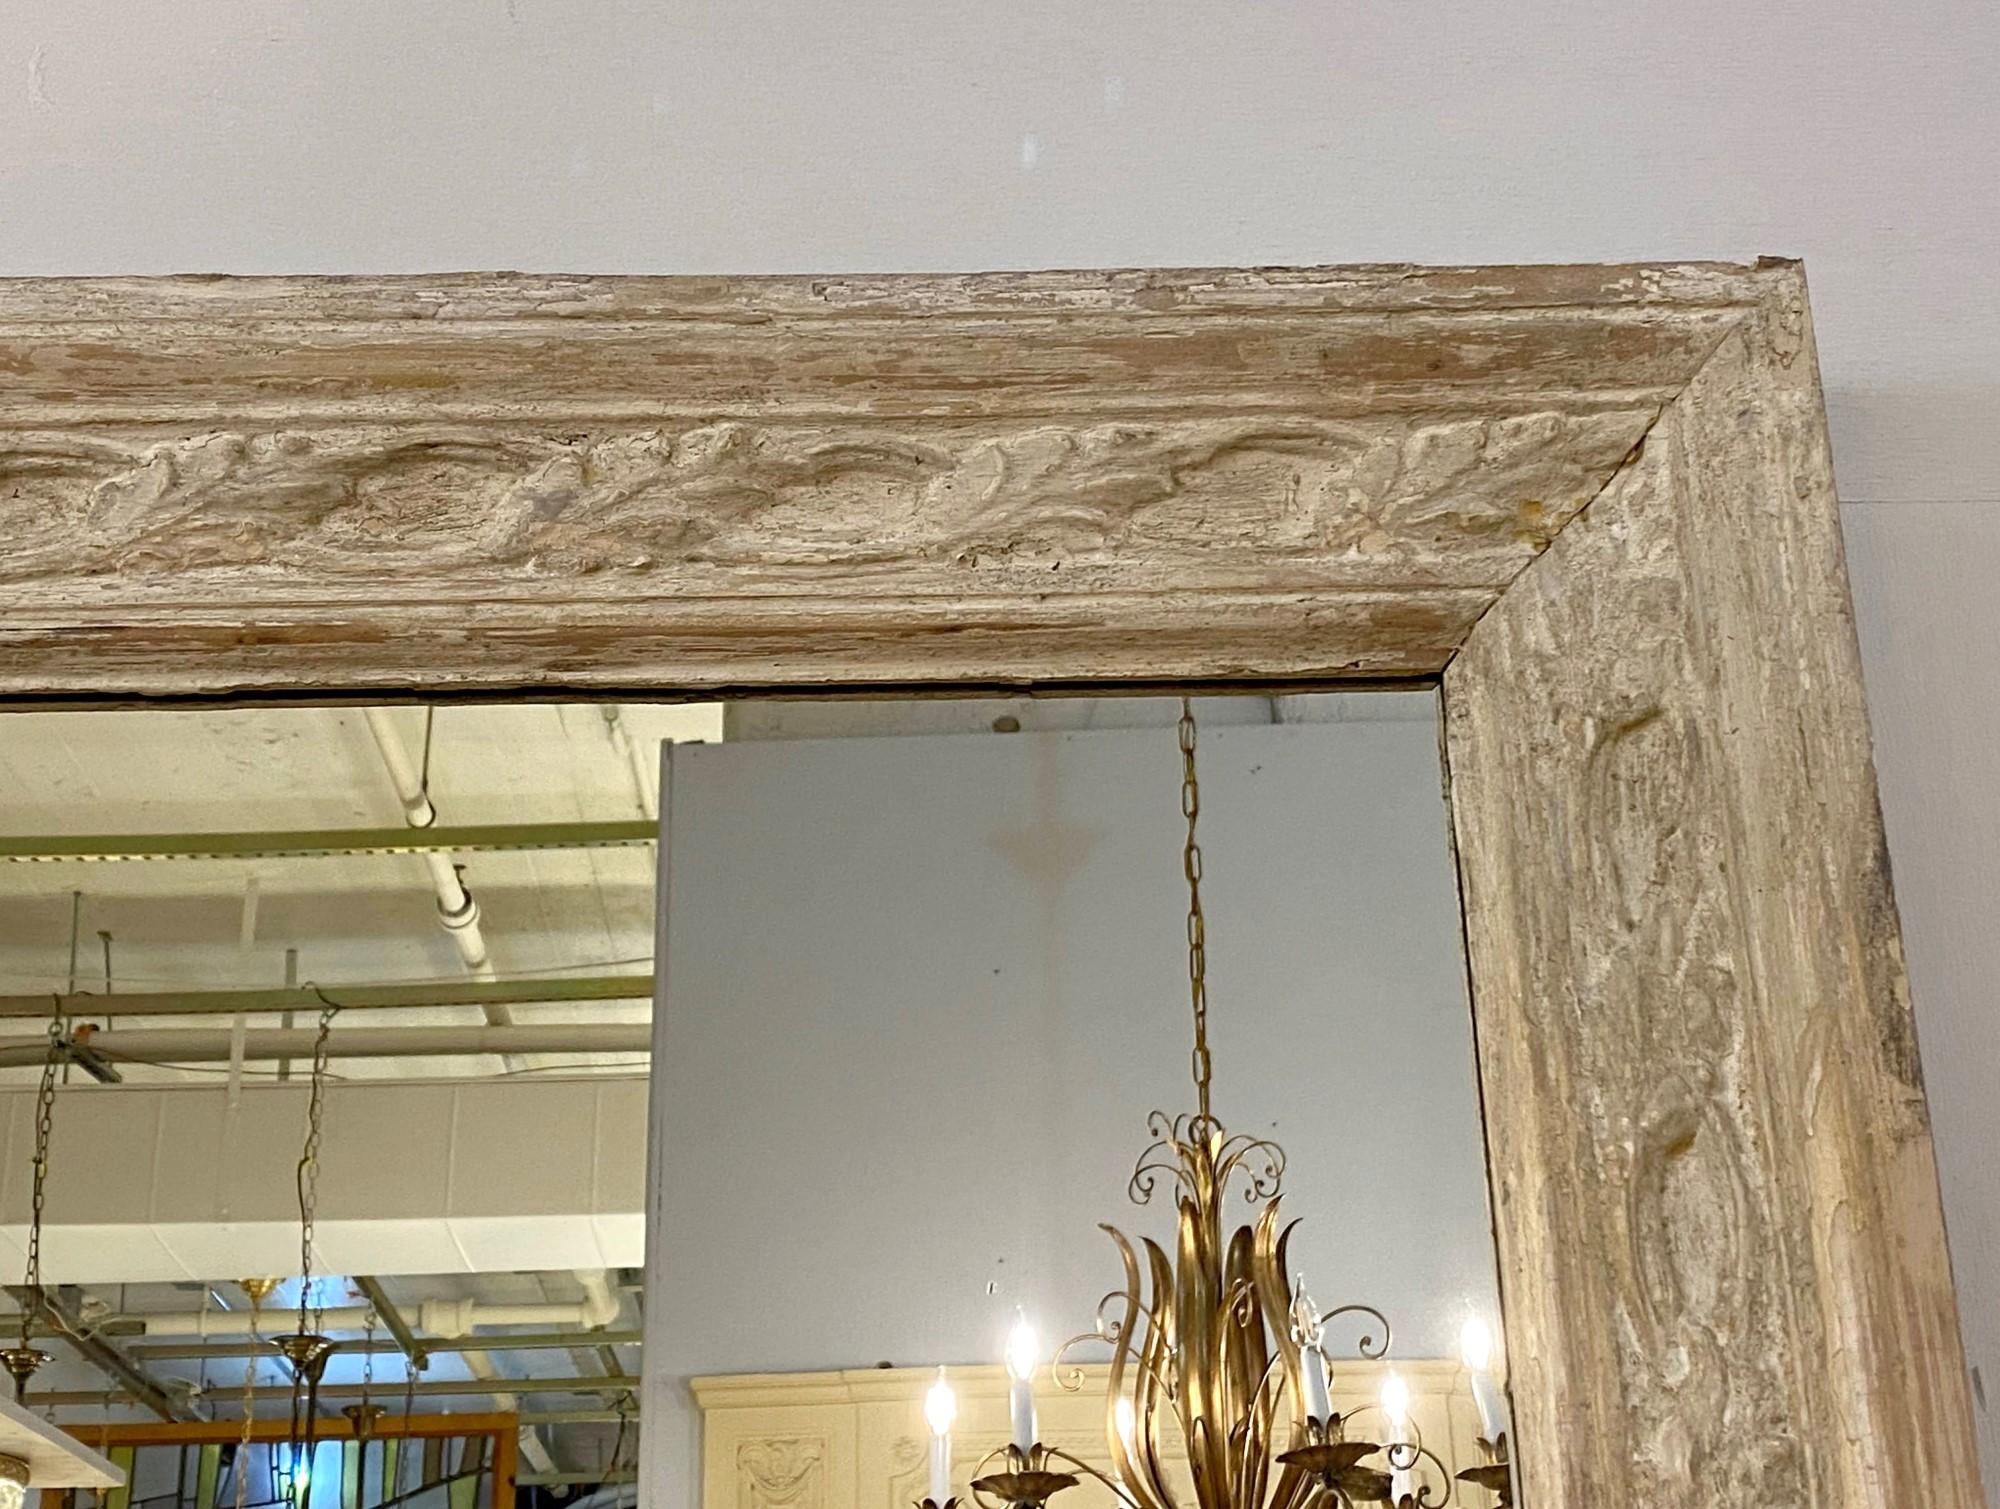 1880s antique hand carved wood door molding with original paint reclaimed from an old Brooklyn brownstone now newly made into a wall mirror. This can be seen at our 333 West 52nd St location in the Theater District West of Manhattan.